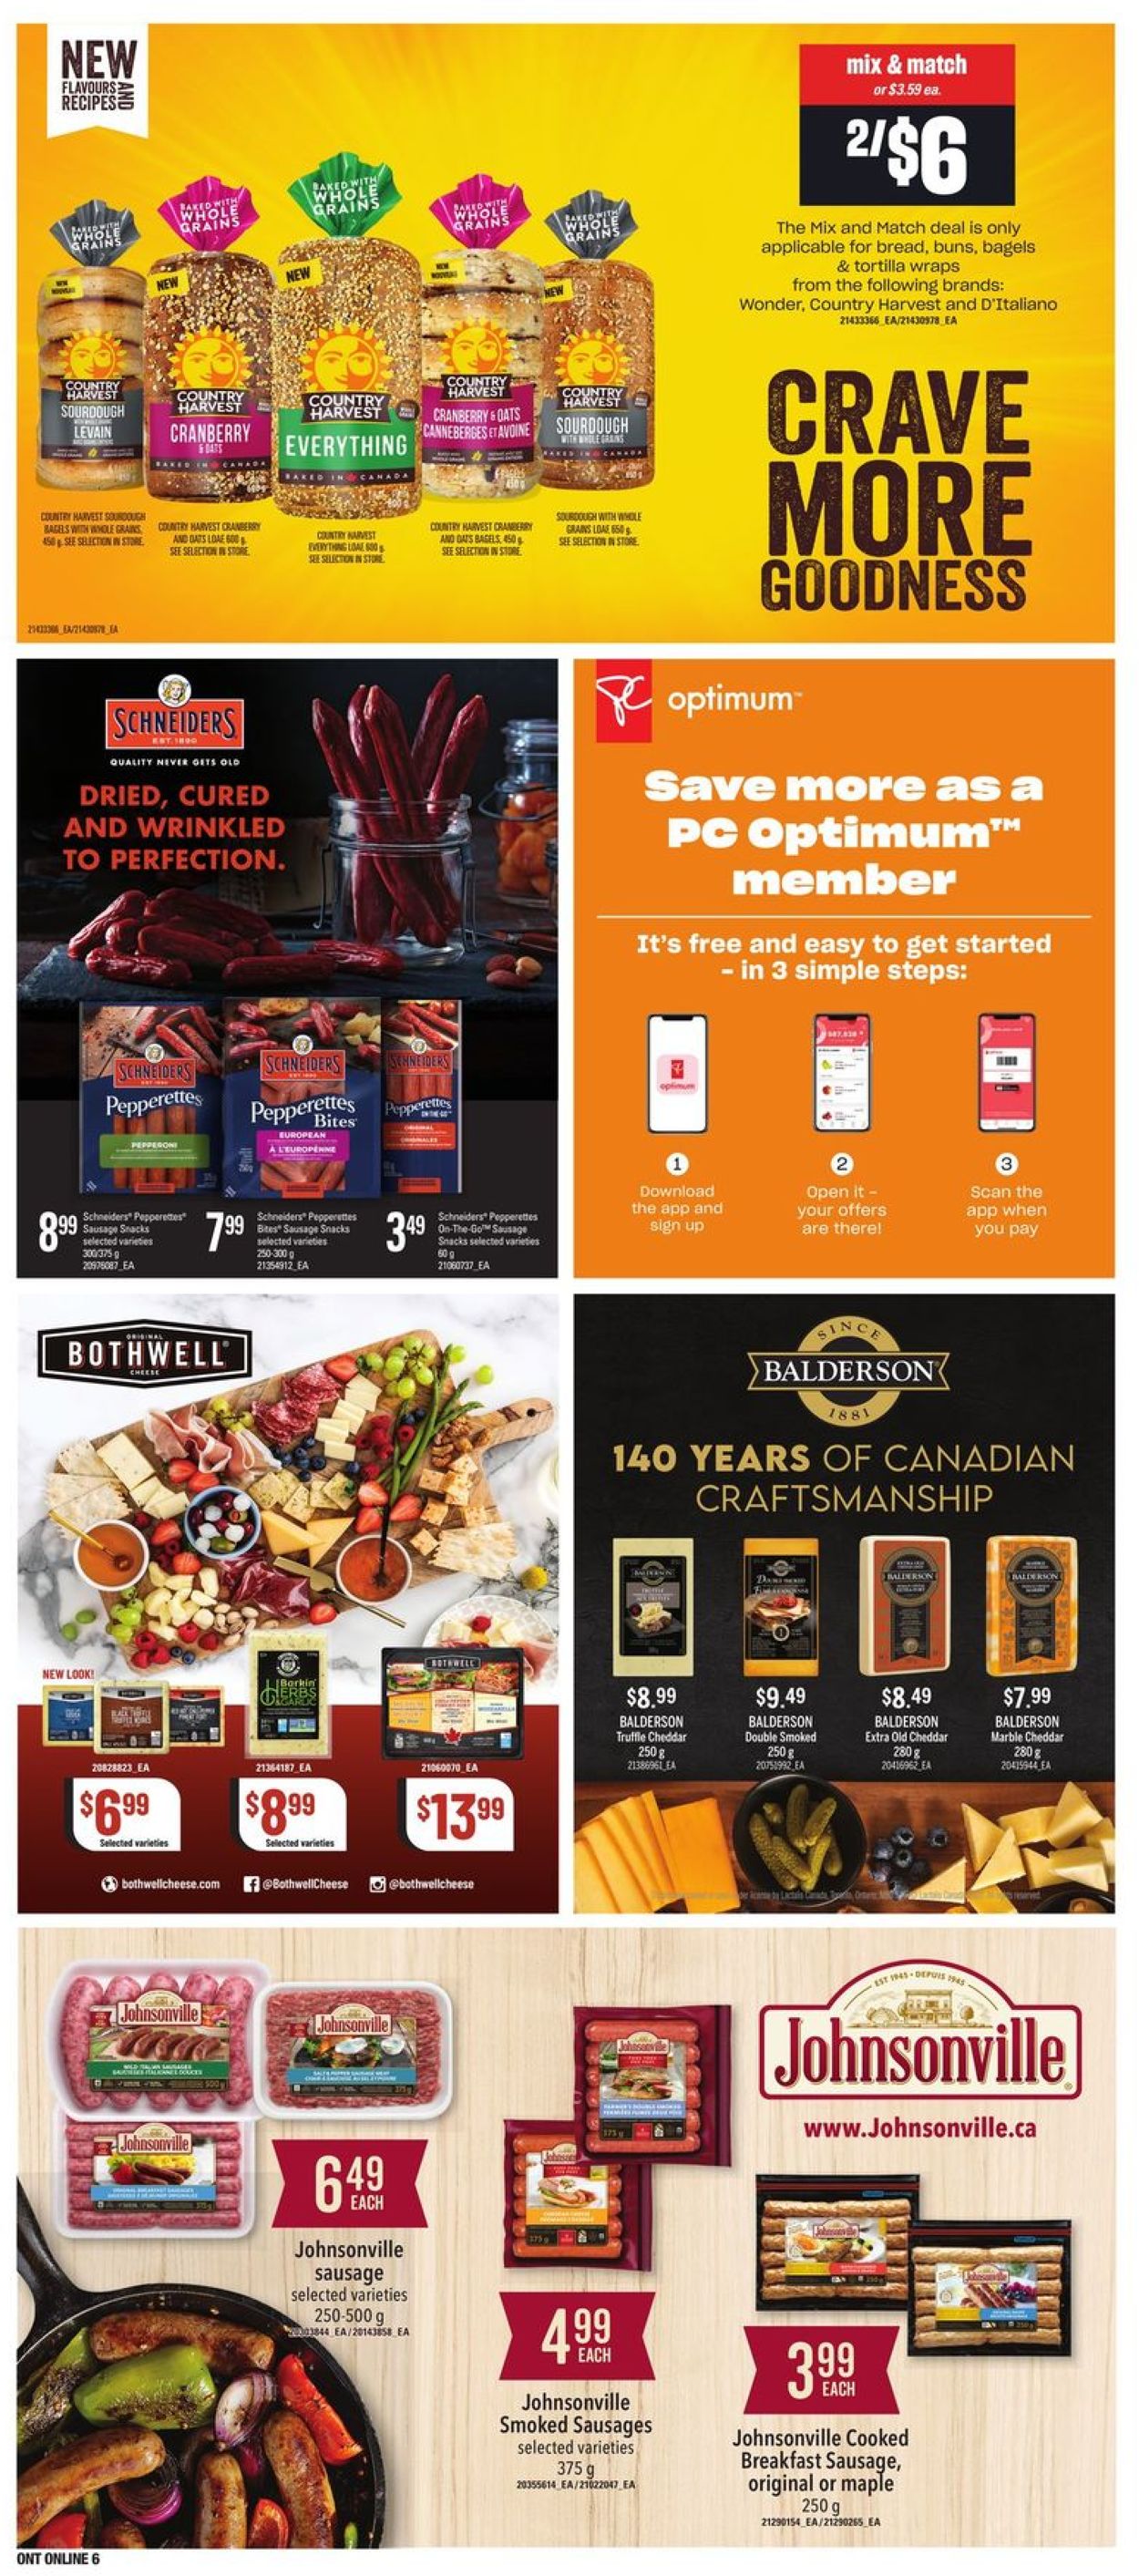 Zehrs Flyer from 02/10/2022